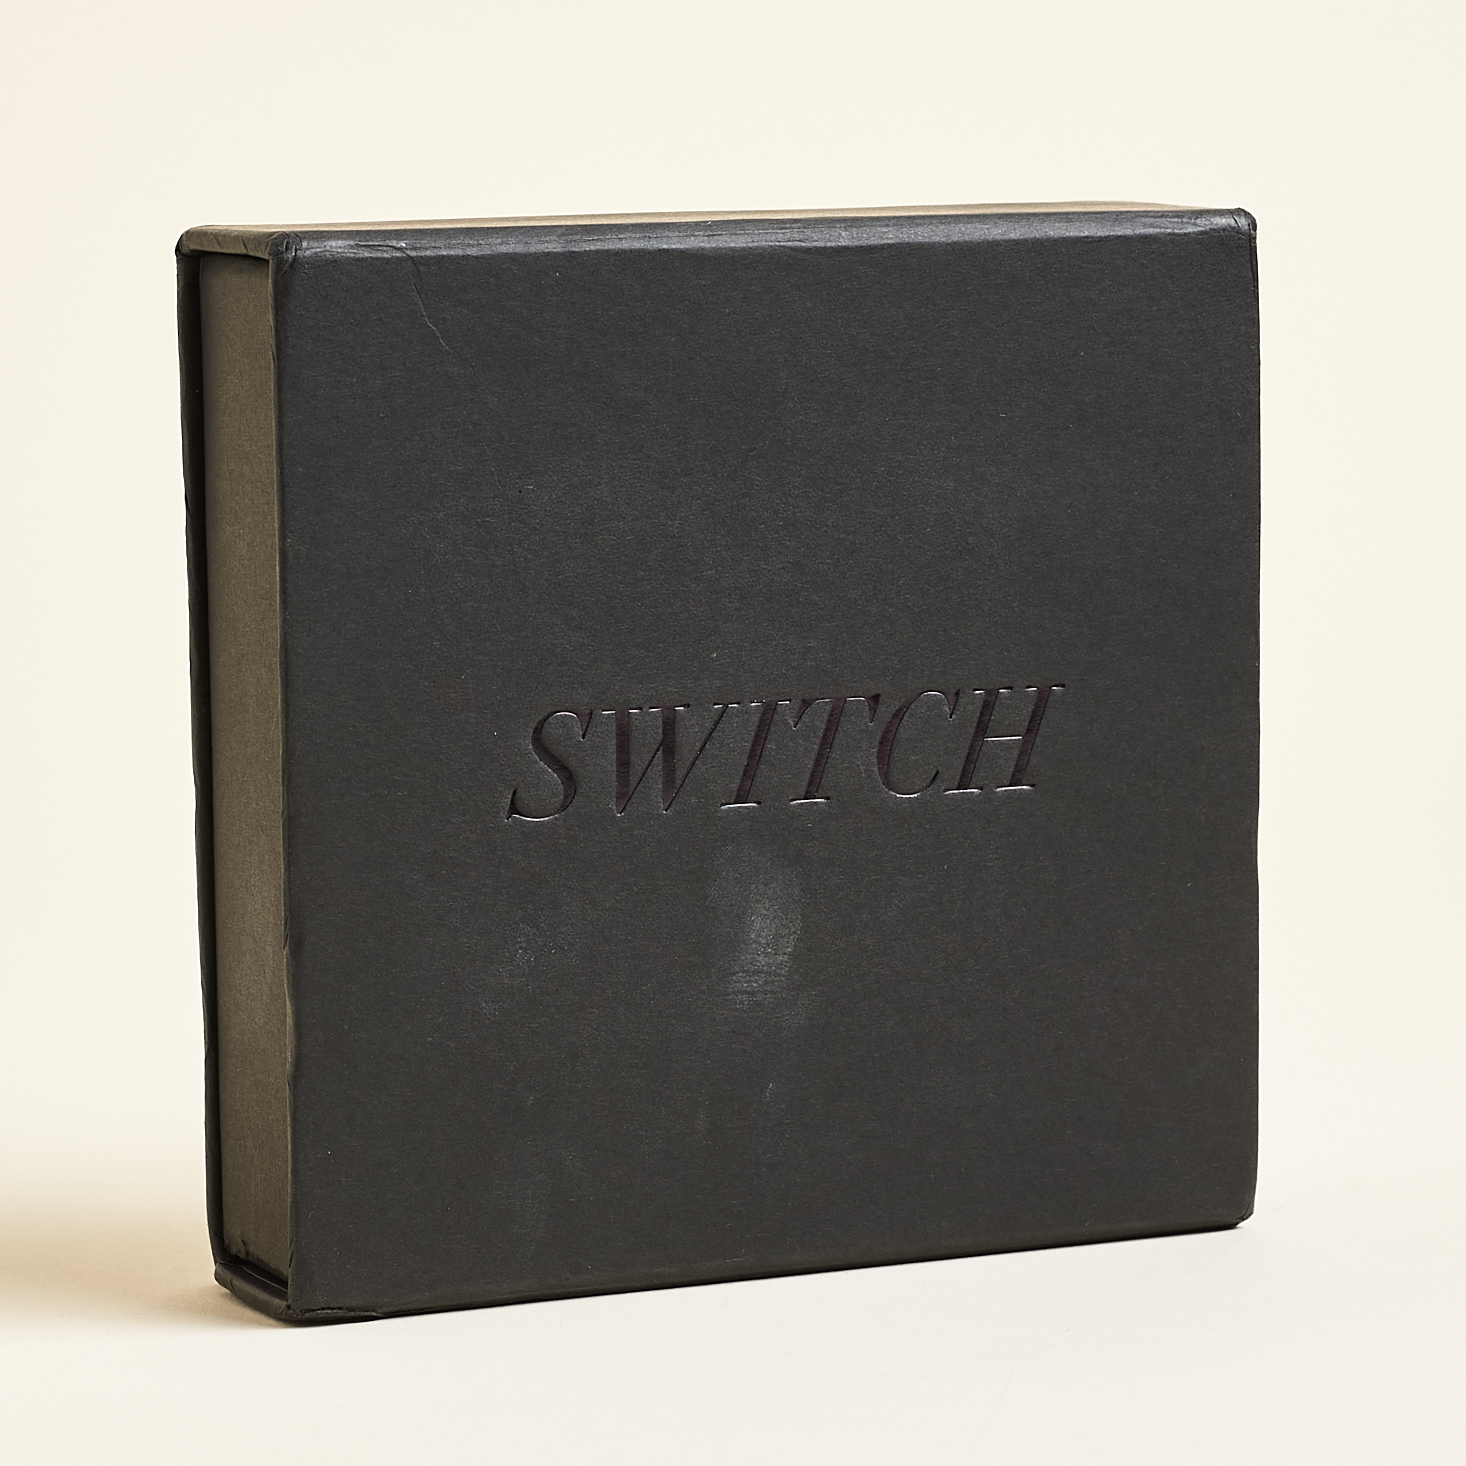 Switch Designer Jewelry Rental Review + 50% Off Coupon – January 2020